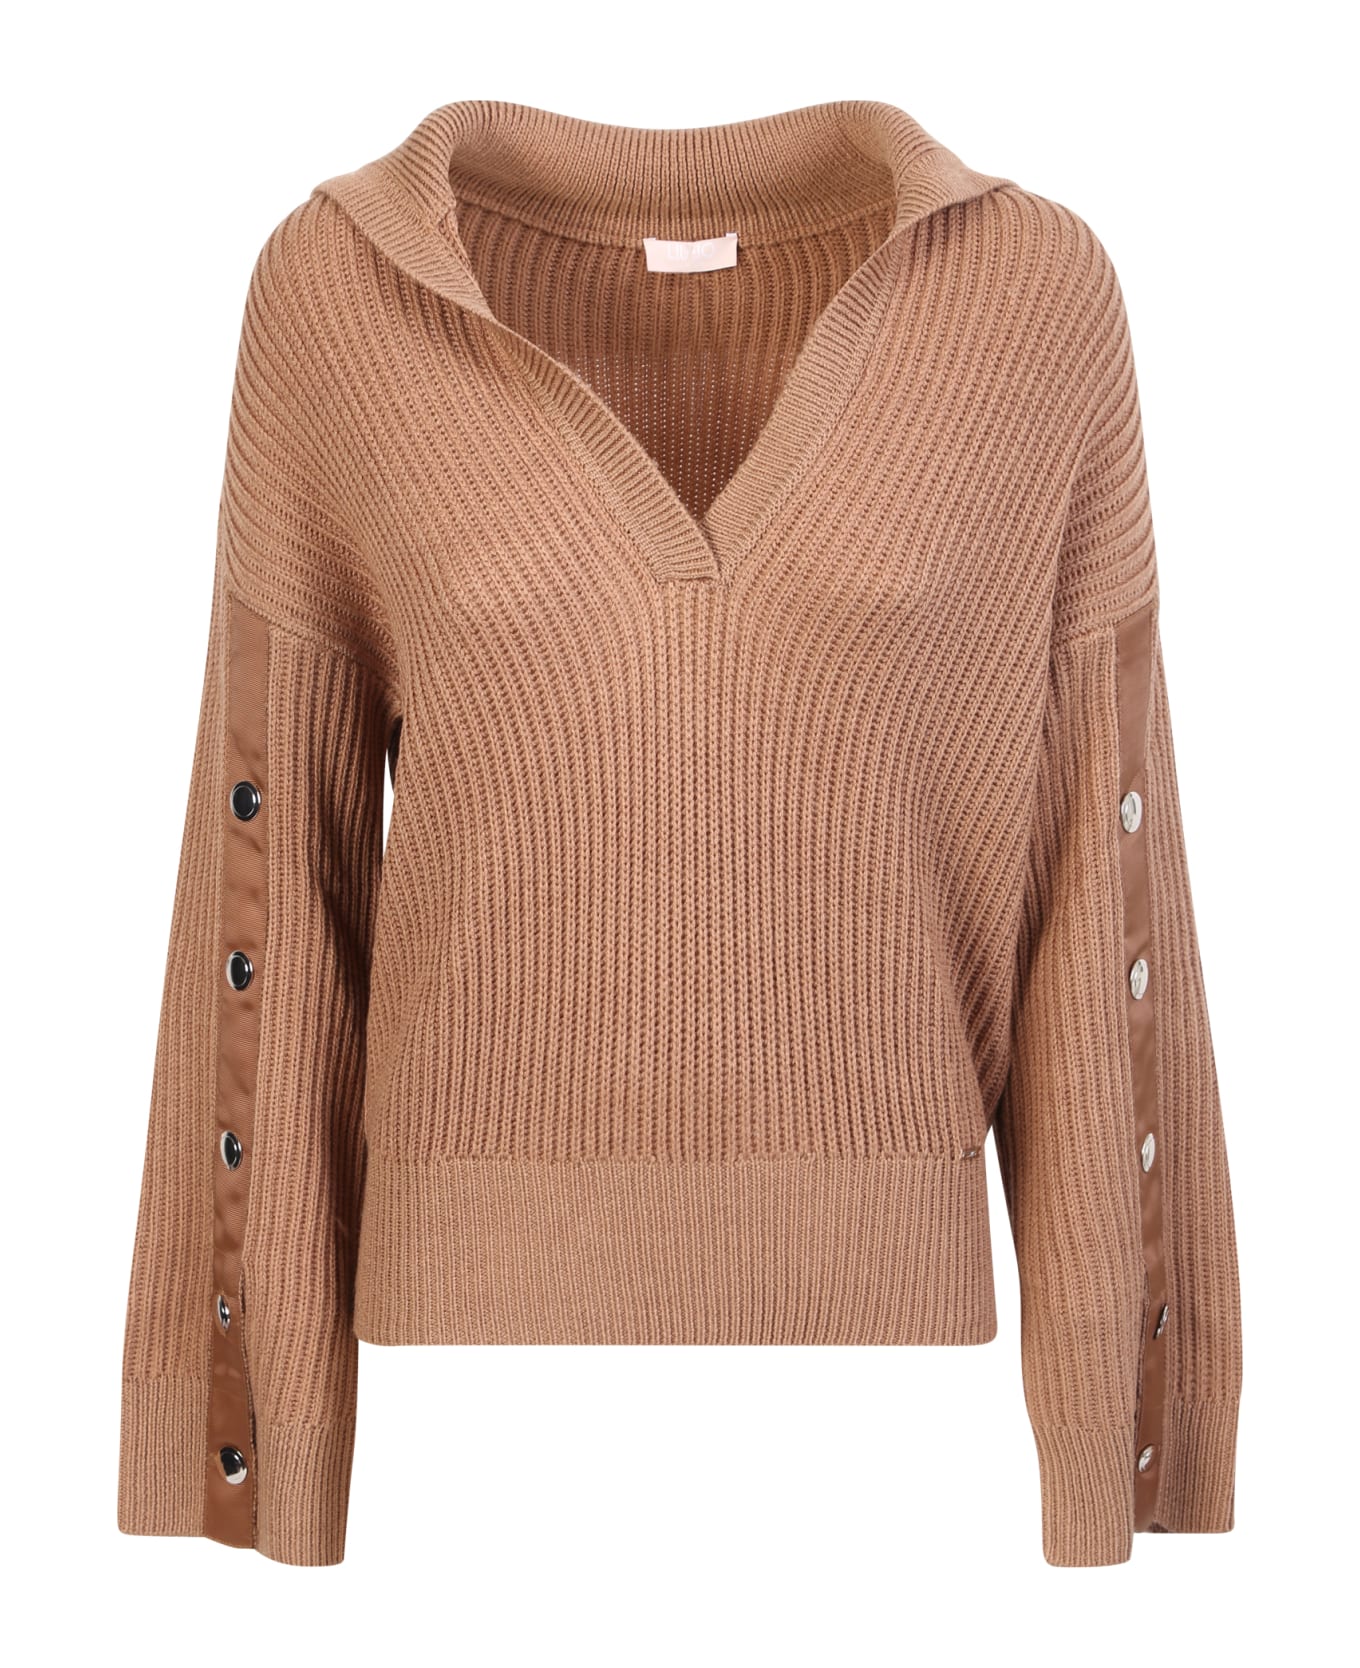 Liu-Jo Liu Jo Camel Knit Sweater With Gold Buttons - Brown ニットウェア